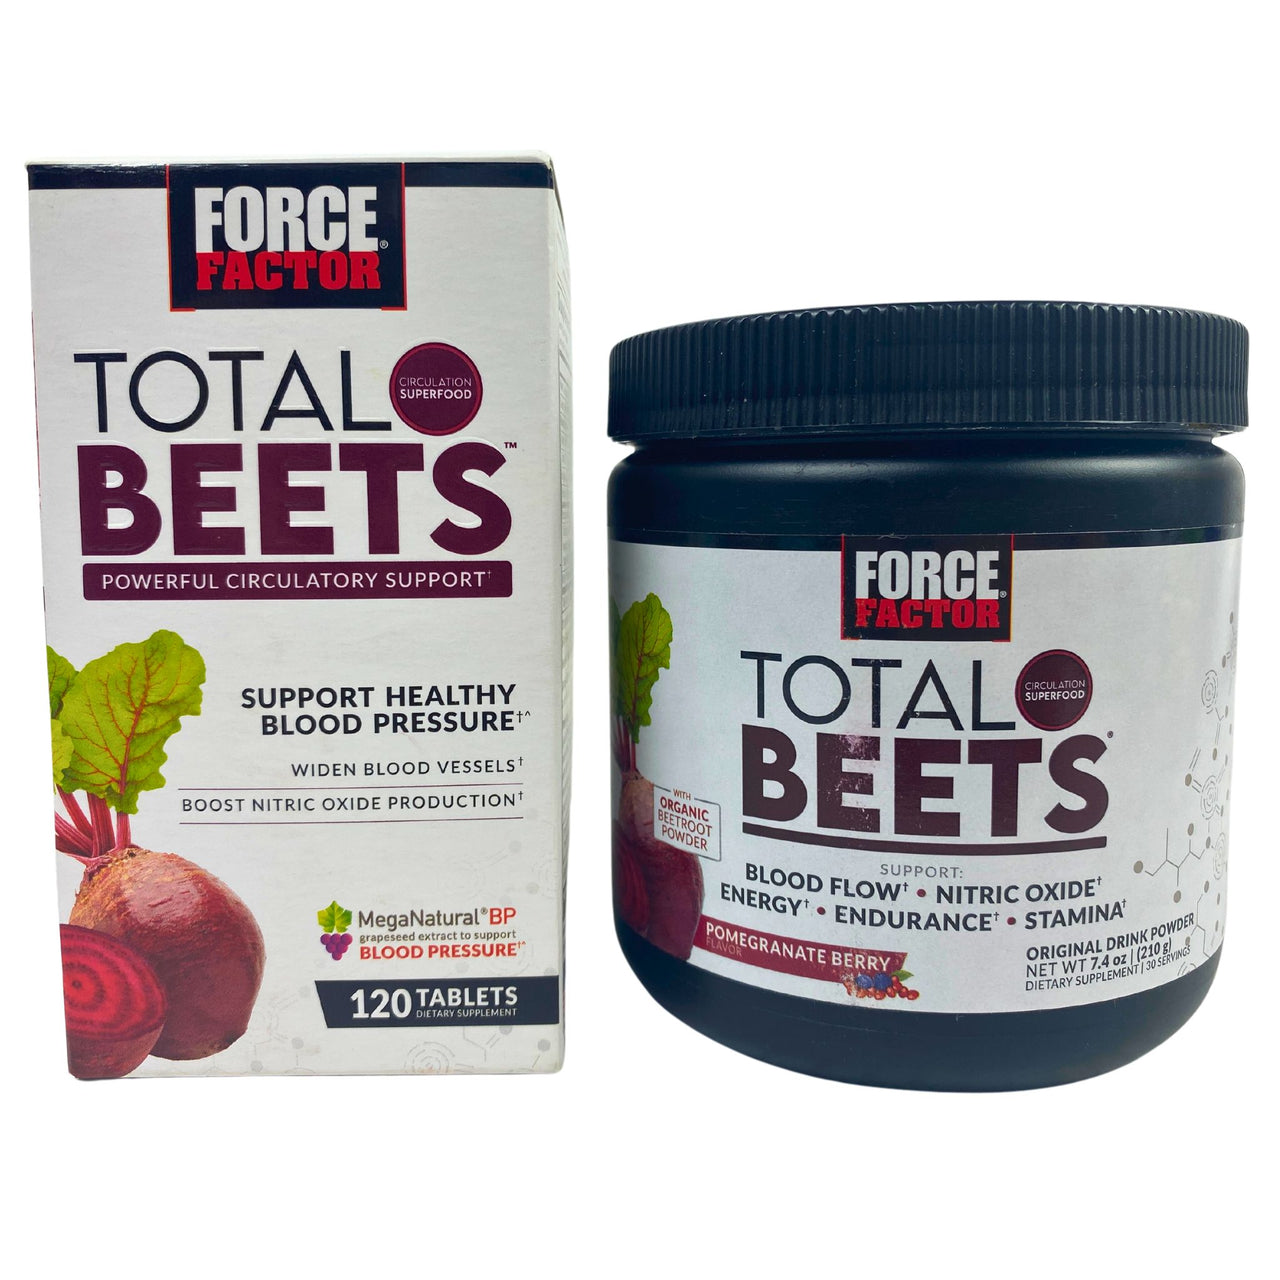 Force Factor Total Beets Mix Includes Tablets & Drink Powder